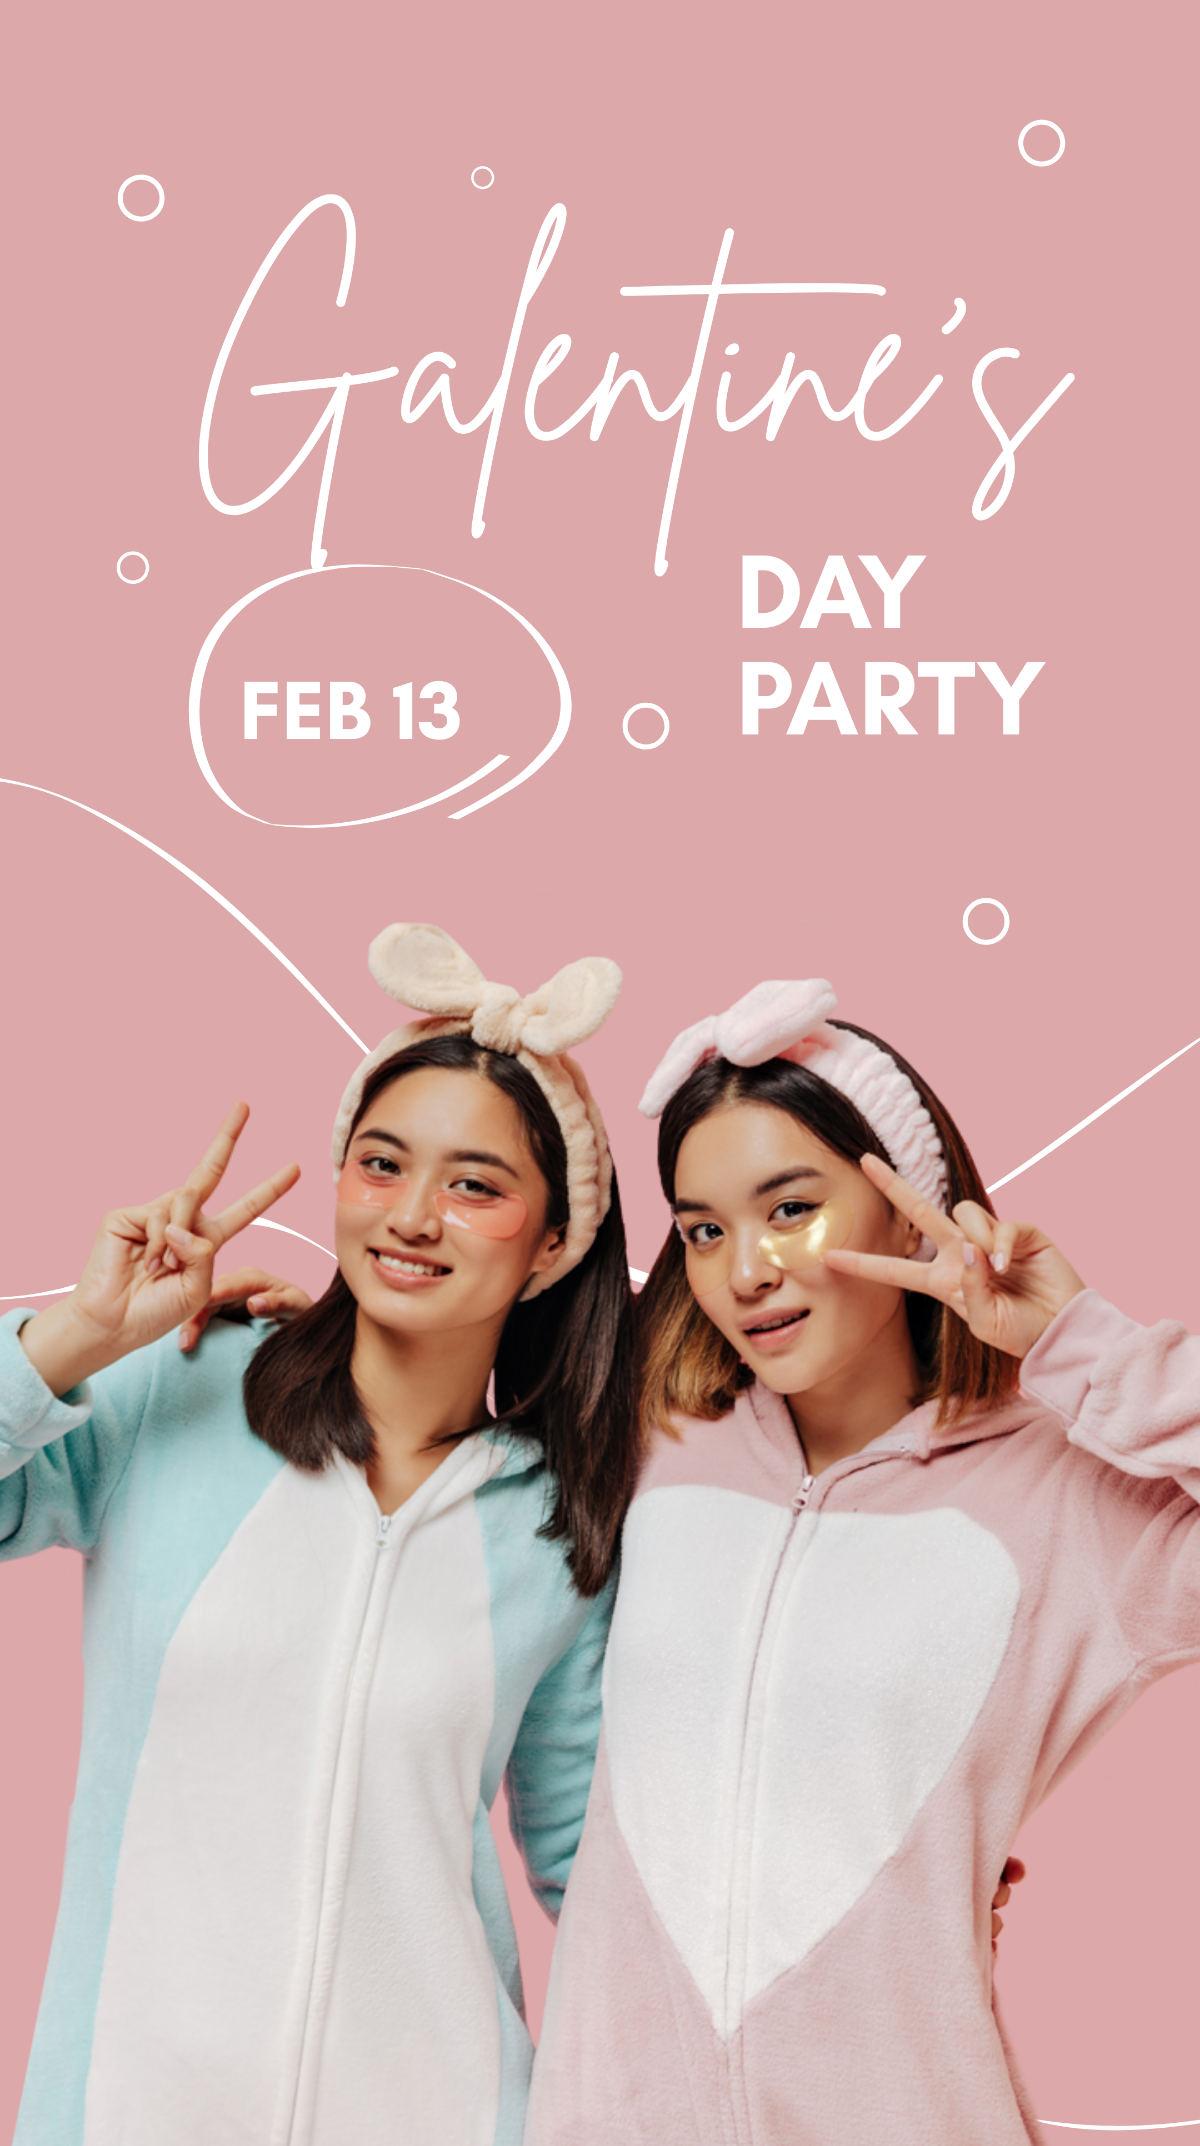 Free Galentines Day Party Whatsapp Post Template